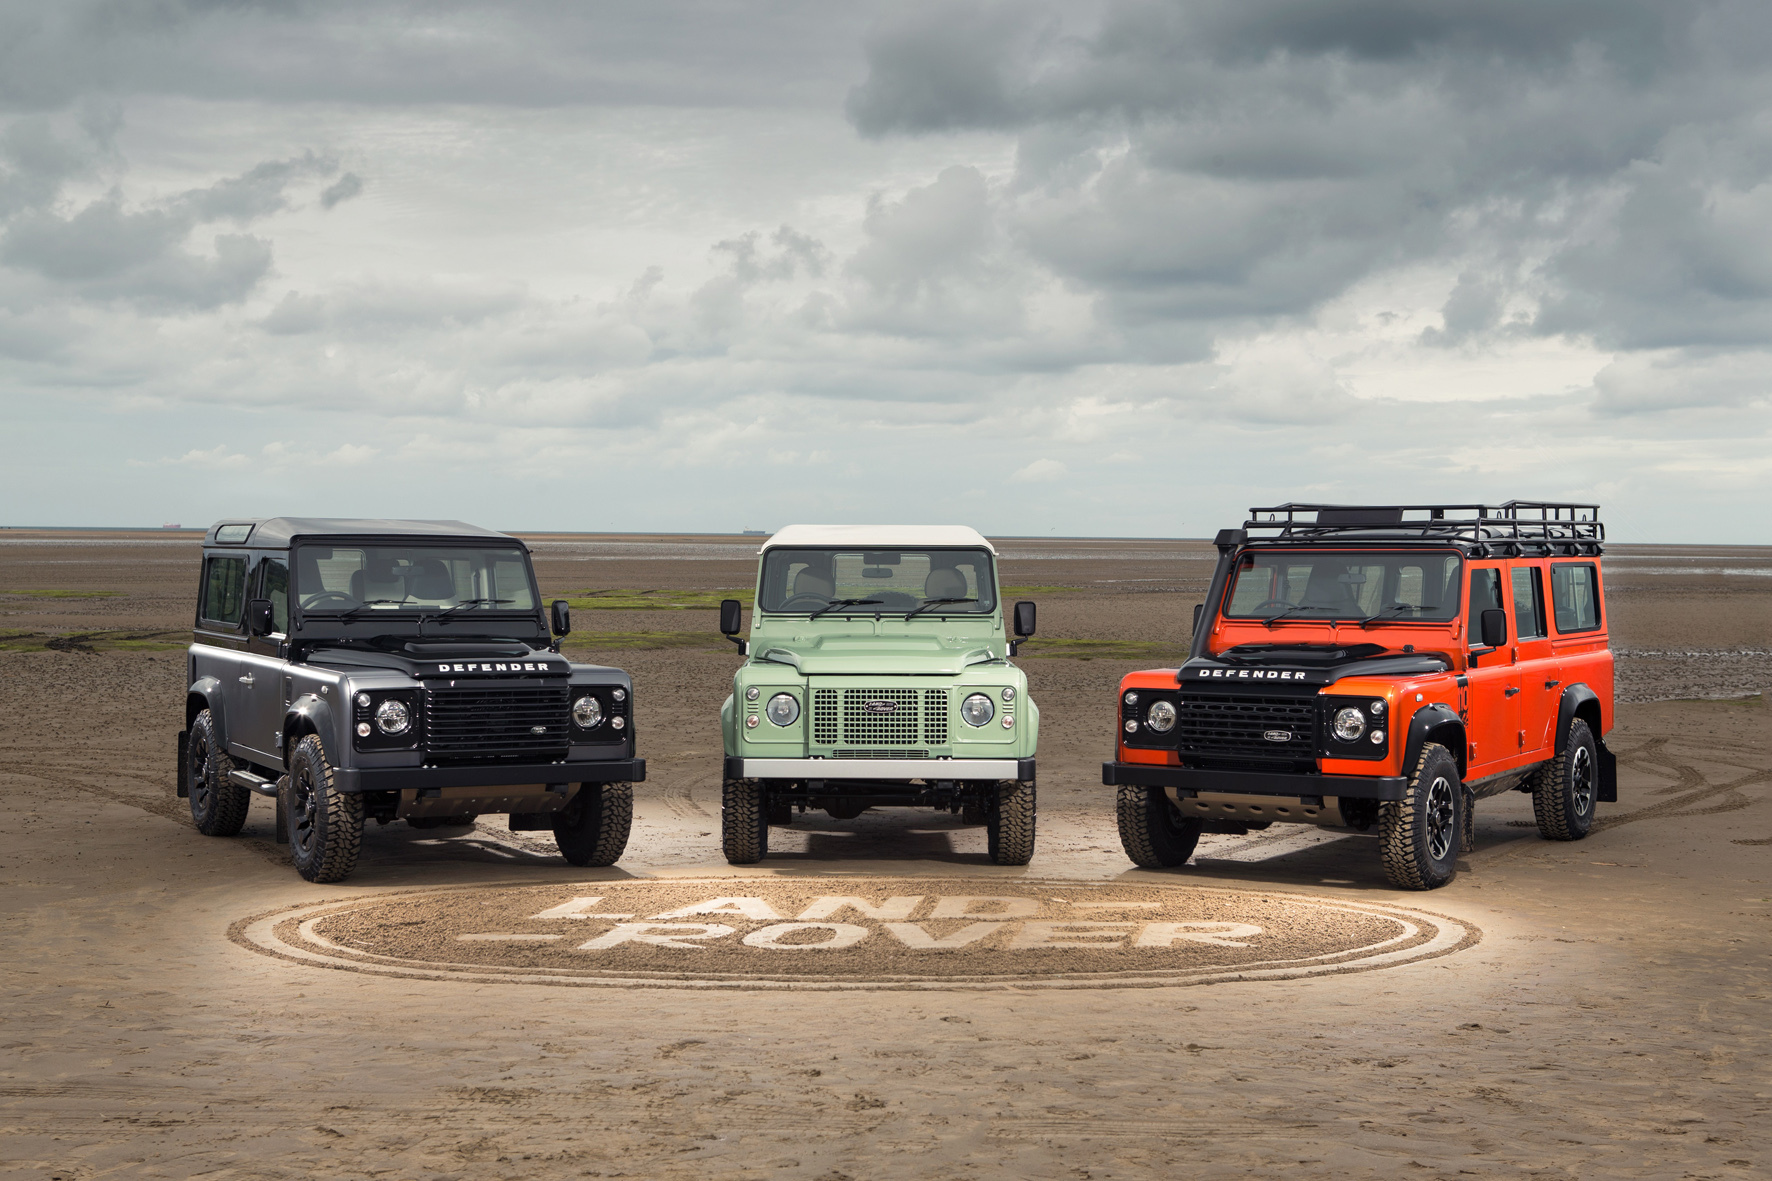 2015 Land Rover Defender Autobiography, Heritage and Adventure Editions (L-R)